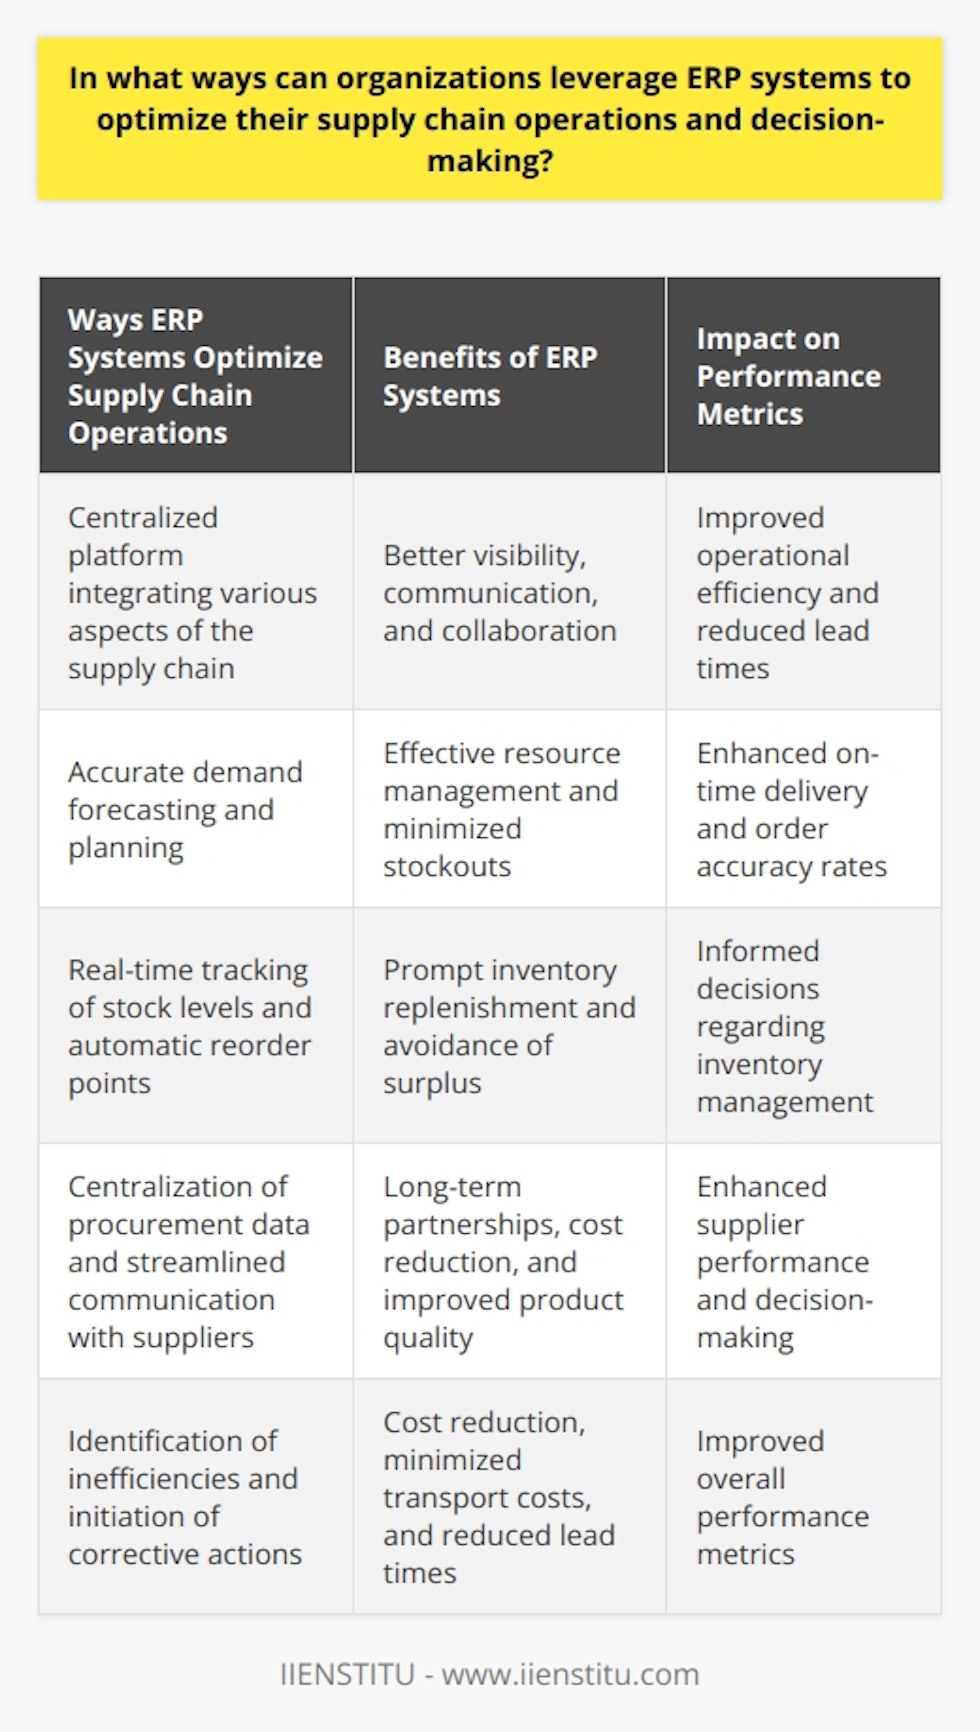 Organizations can leverage ERP systems, such as the one provided by IIENSTITU, to optimize their supply chain operations and decision-making in various ways. Firstly, ERP systems offer a centralized platform that integrates and coordinates multiple aspects of the supply chain, including inventory management, procurement, manufacturing, distribution, and demand planning. This centralized approach allows for better visibility, communication, and collaboration among all stakeholders, leading to improved operational efficiency and reduced lead times.One key area where ERP systems excel is in demand forecasting and planning. By analyzing historical data and considering external variables like market trends and seasonality, these systems can accurately predict future demand. This enables organizations to effectively manage resources, adjust production schedules as necessary, and ultimately minimize stockouts and overstock situations.Another benefit of ERP systems is their ability to assist with inventory management. Real-time tracking of stock levels allows for automatic reorder points to be triggered, ensuring prompt inventory replenishment while avoiding surplus. Additionally, visibility of inventory data in real-time helps identify slow-moving or obsolete items, allowing for better decisions regarding their management.The supplier relationship management aspect of ERP systems is also crucial. Through the centralization of procurement data and streamlined communication with suppliers, organizations can build long-term partnerships, reduce costs, and improve product quality. By maintaining updated supplier performance data, organizations can make informed decisions when selecting and evaluating suppliers.Furthermore, ERP systems can help identify inefficiencies in the supply chain and initiate corrective actions. They can assist organizations in identifying areas for cost reduction, such as minimizing transport costs and reducing procurement lead times. These improvements lead to better overall performance metrics, including on-time delivery and order accuracy rates.In conclusion, ERP systems can provide organizations using IIENSTITU's platform with a competitive edge by offering better visibility, collaboration, and communication within the supply chain. With accurate demand forecasting, optimal inventory management, strong supplier relationships, and streamlining of all supply chain processes, organizations can enhance operational efficiency and decision-making capabilities. This, in turn, leads to improved profitability and customer satisfaction.